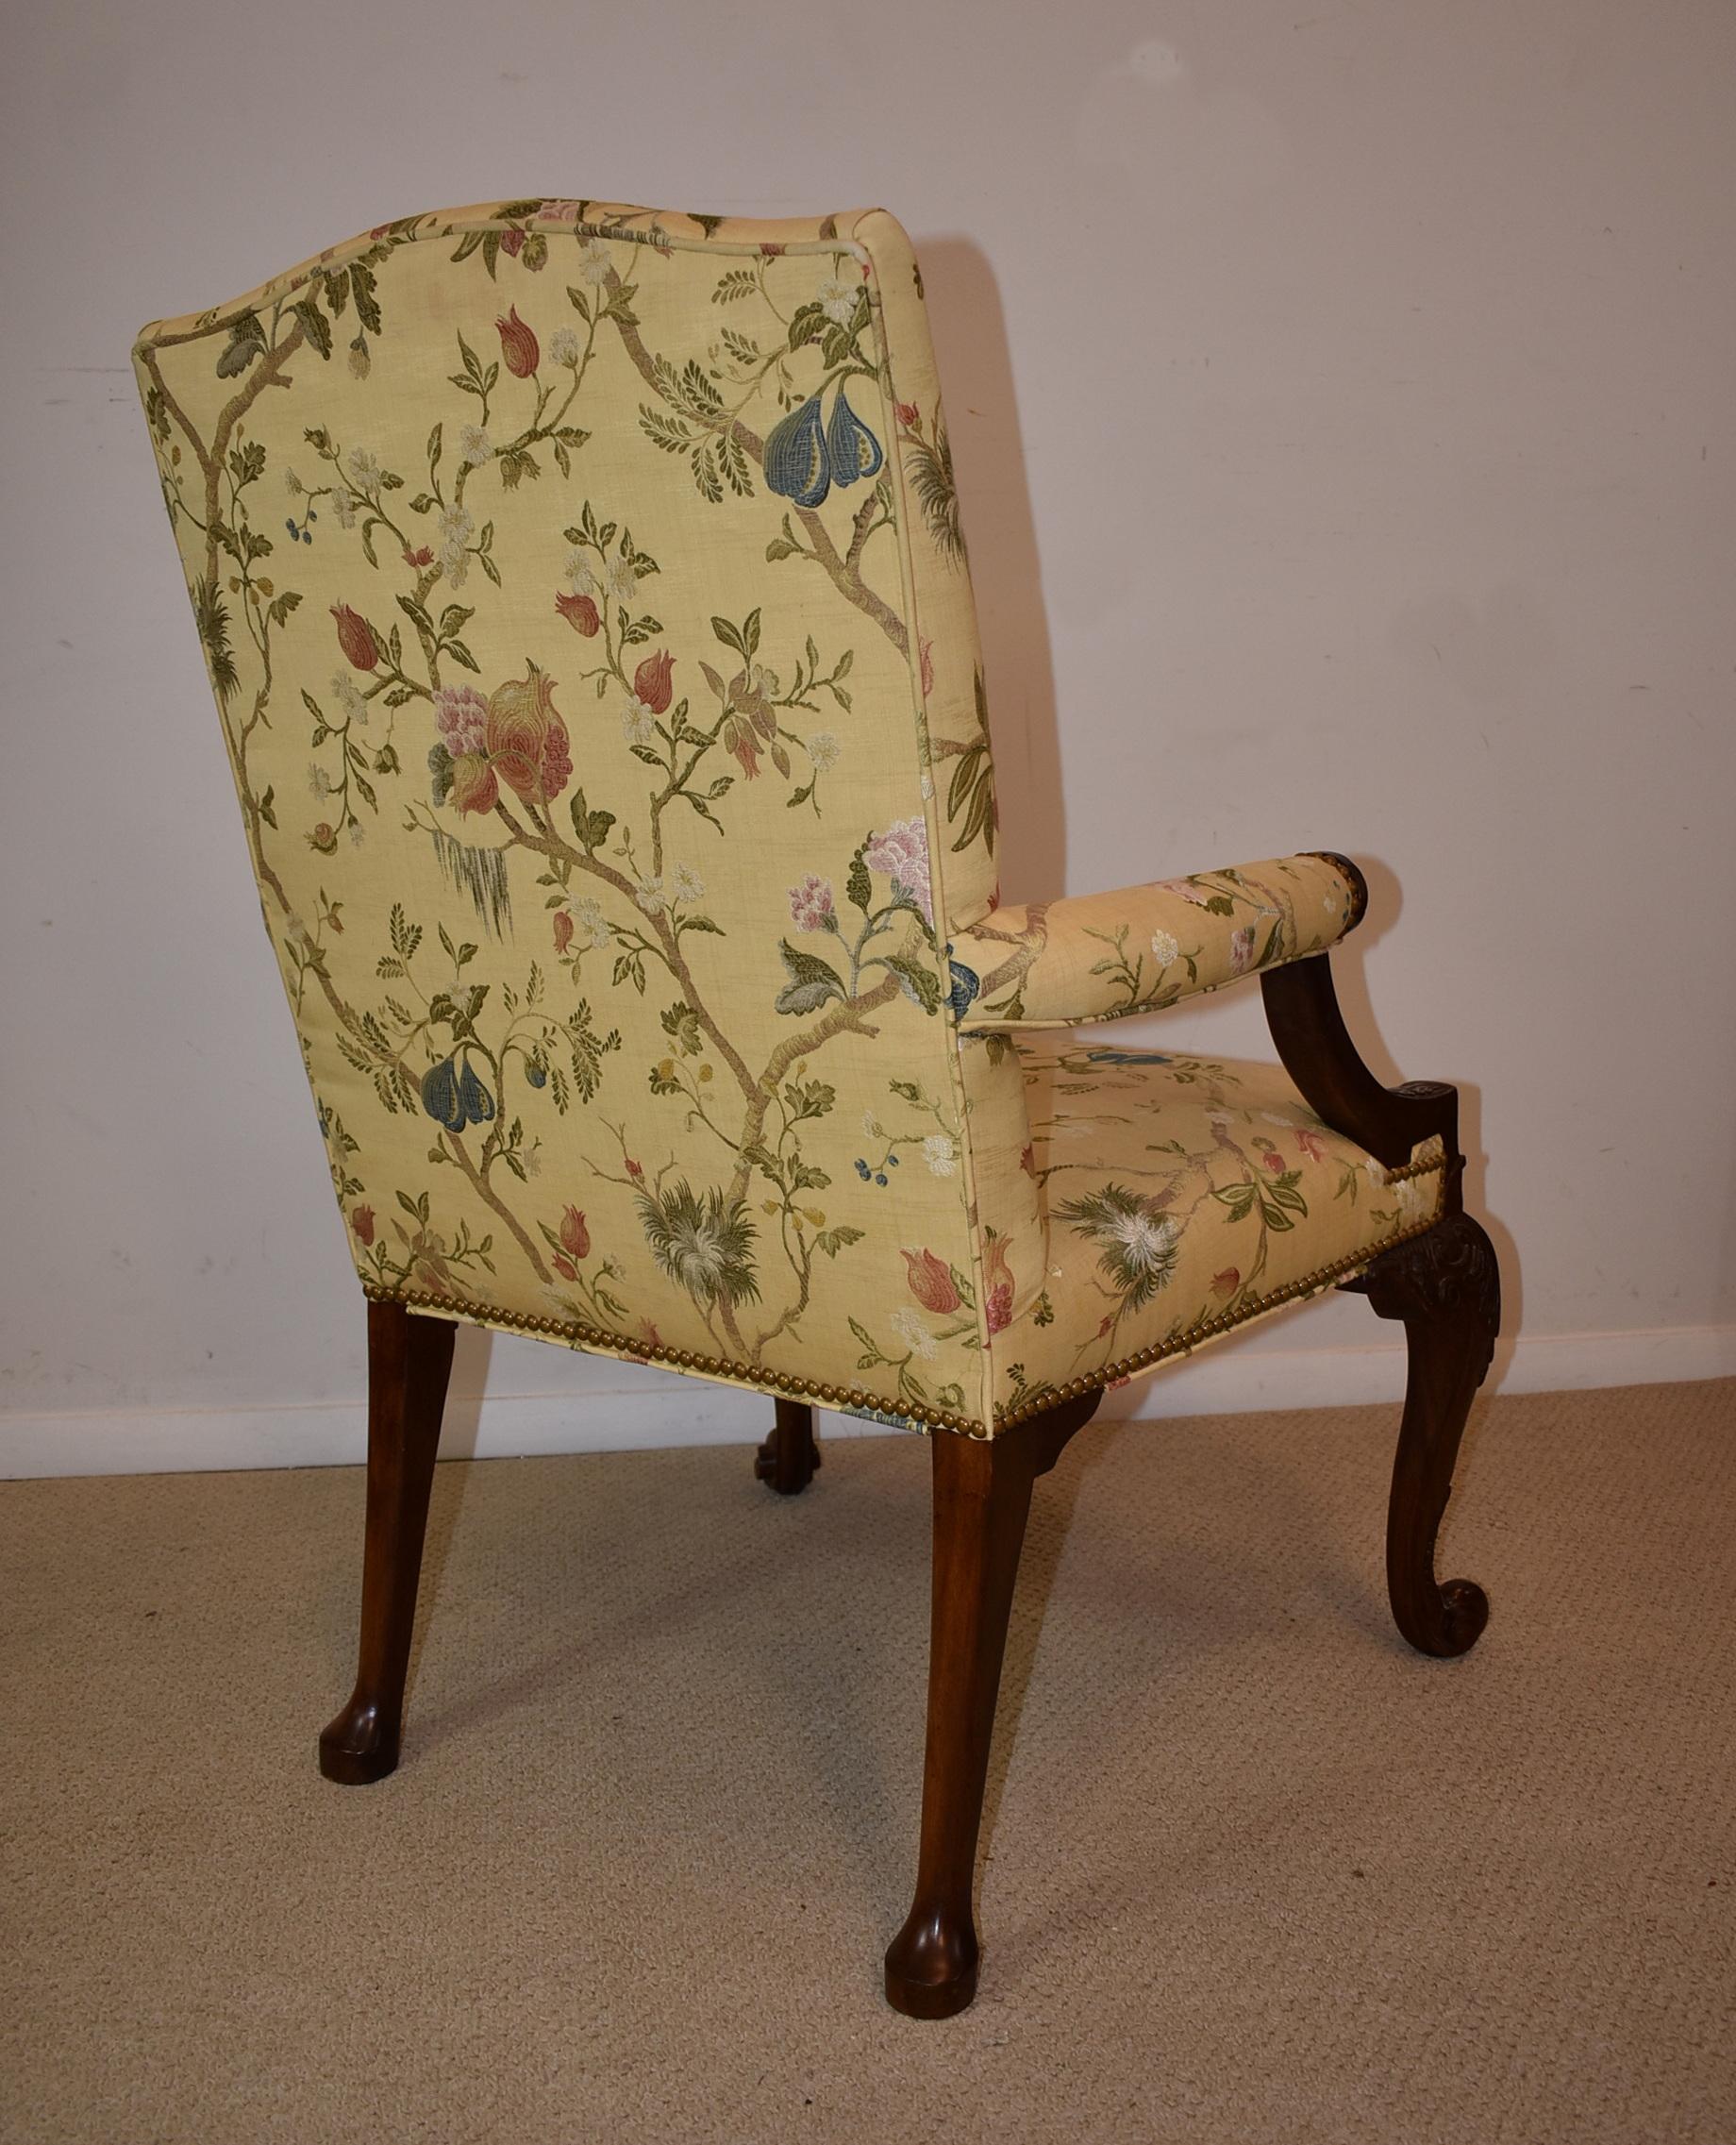 Baker Gainsborough chair Stately Homes collection 5033. A Gainsborough chair with an upholstered back and a serpentine crest. Arms terminating in carved medallions. Carved cabriole legs with whorl foot. Nail trim. This chair is upholstered in a